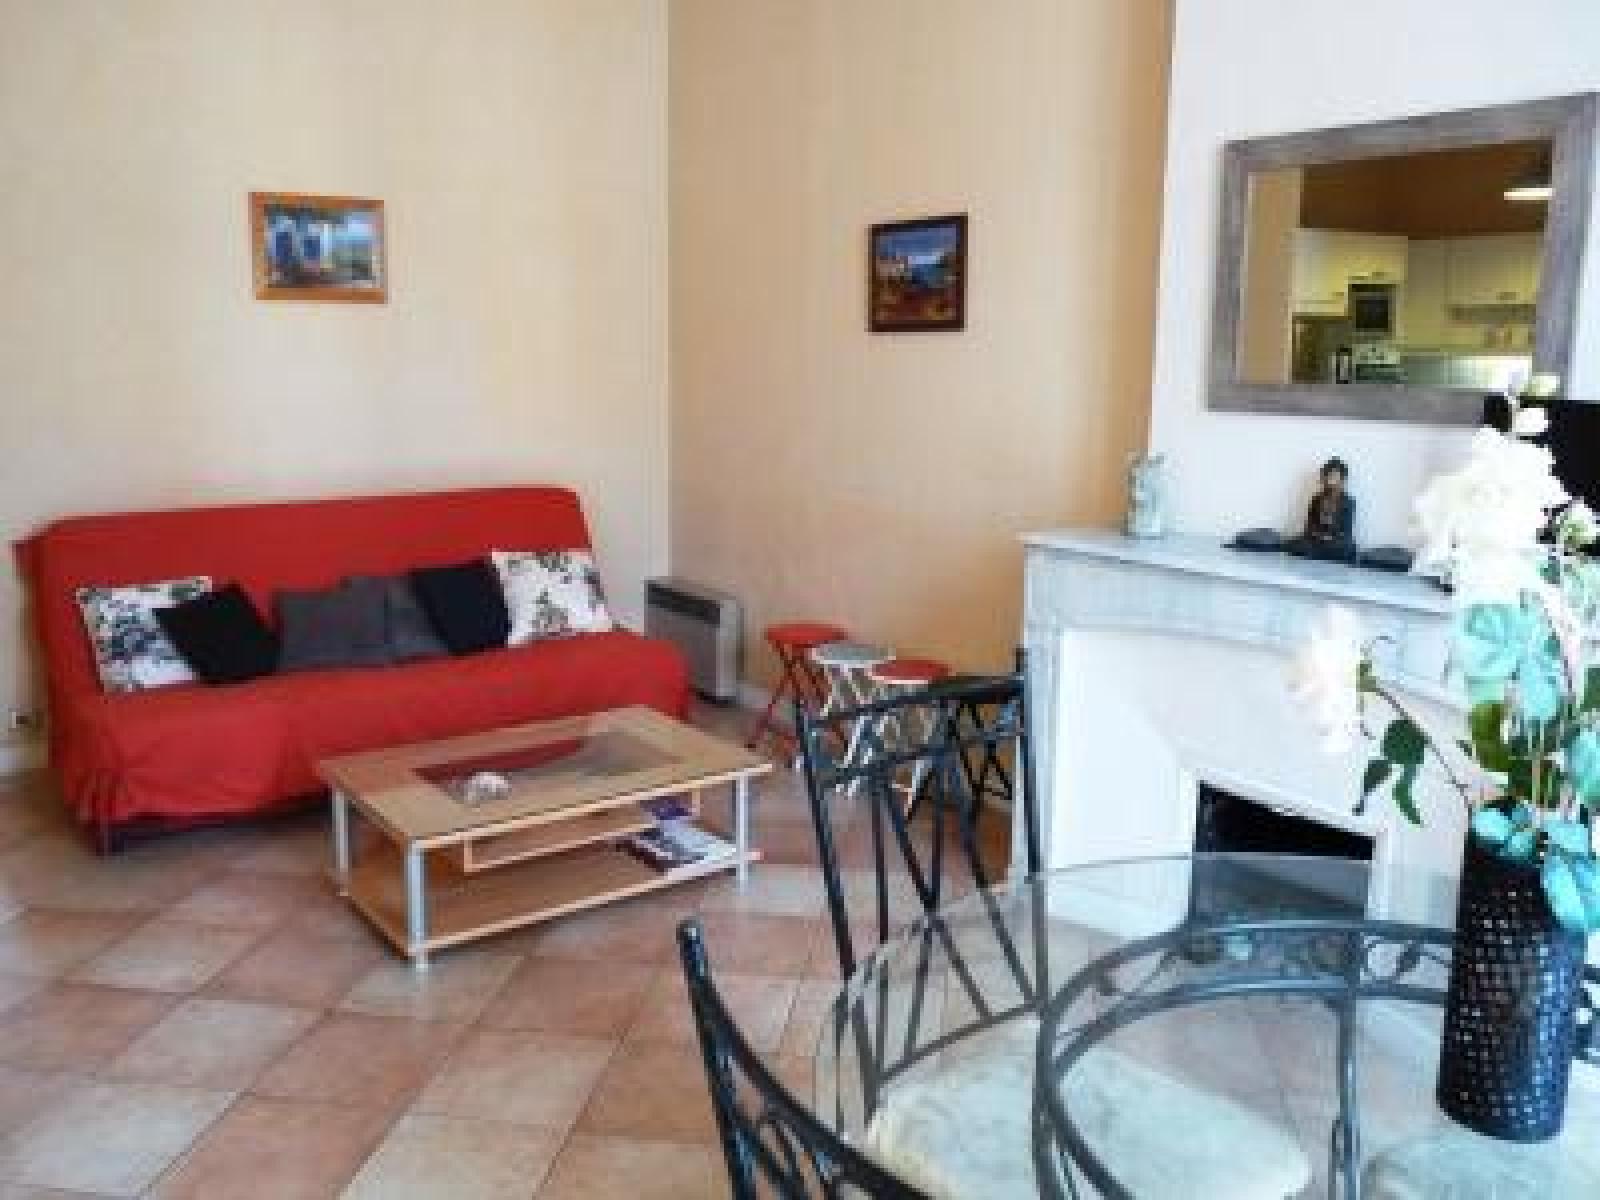 Two bedroom apartment in the centre of Cannes short walk to the Croisette and beaches - 343